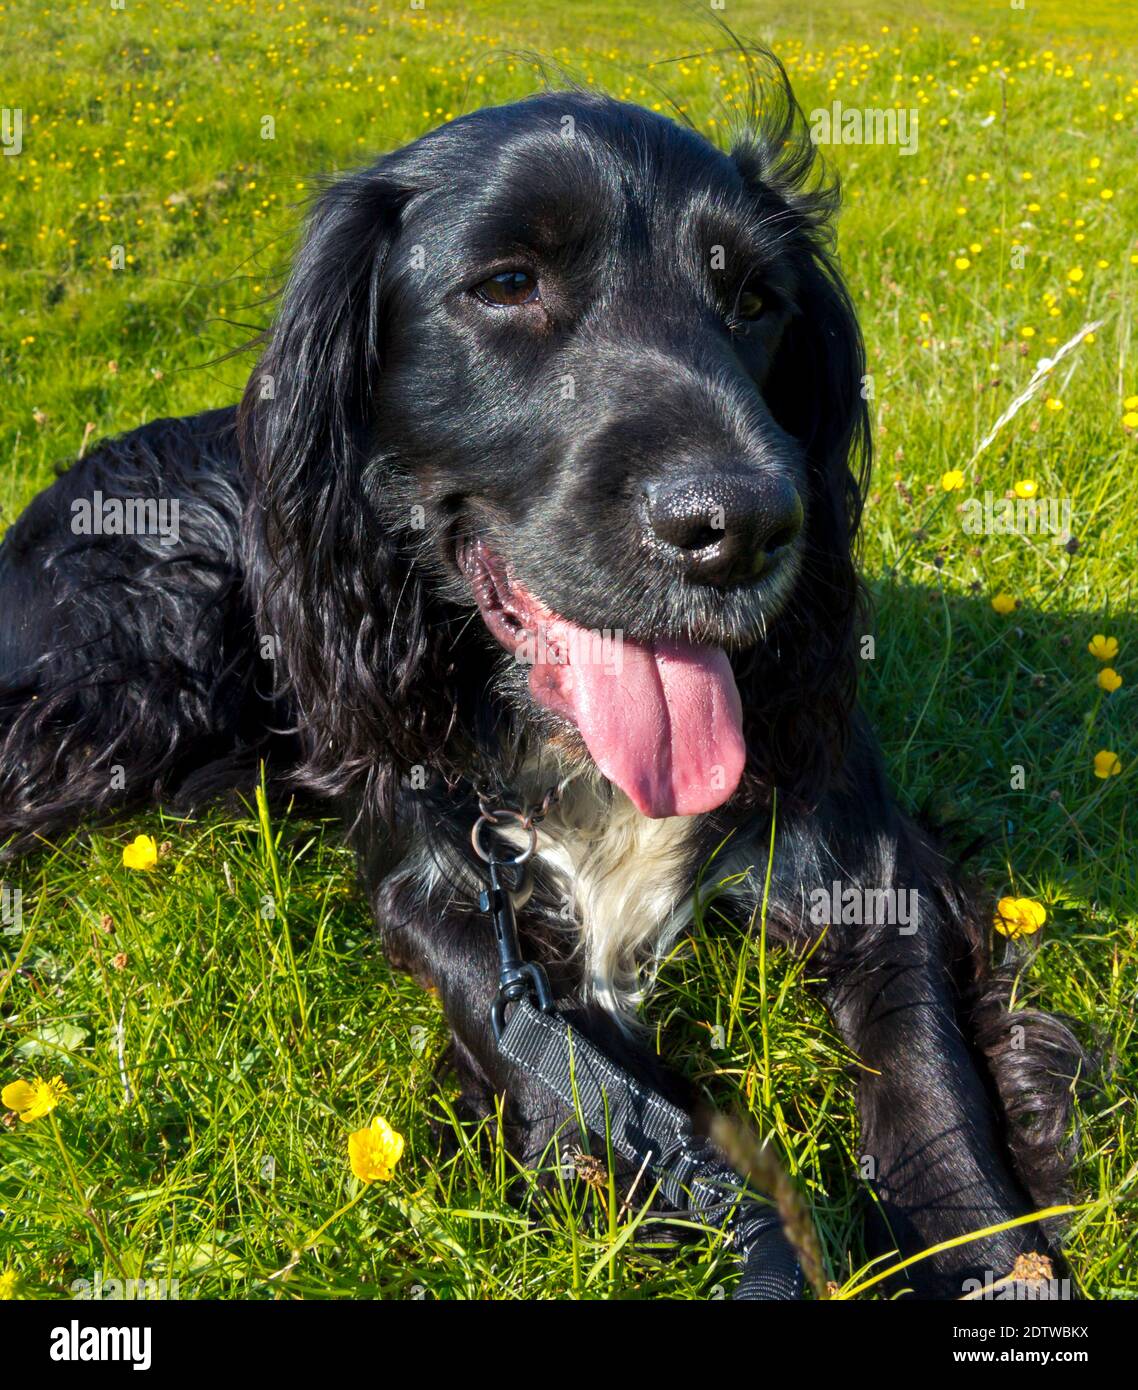 Working cocker spaniel dog with black hair and white chest in countryside panting on a hot summer day. Stock Photo